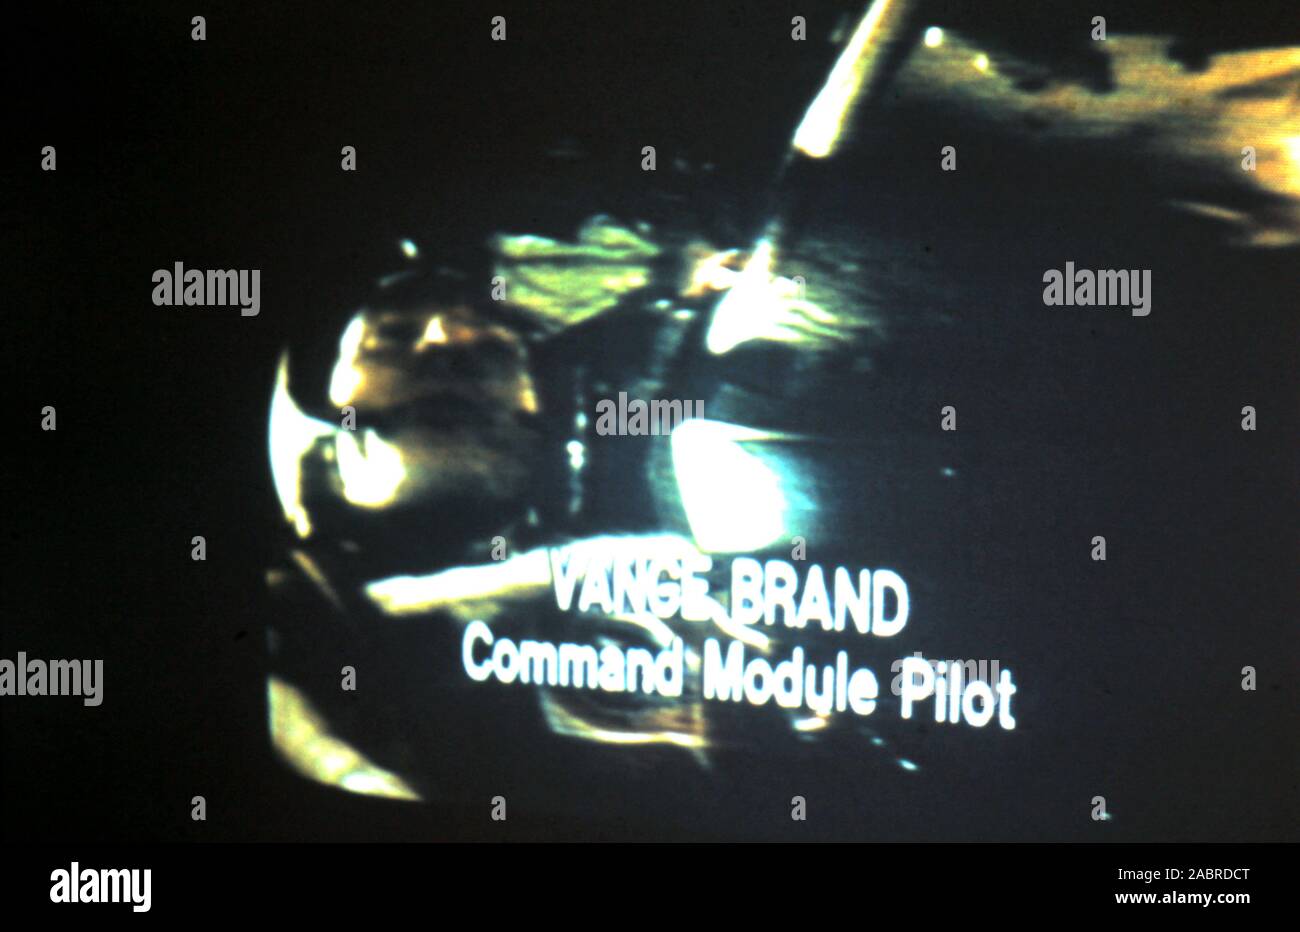 Teleclip - Apollo-Soyuz Test Project - 'Vance Brand - Command Module Pilot' subtitles; - Soyuz 19 docked with Apollo CSM-111 - photo taken directly from color TV screen in the UK - by 'Harry' (the unknown photographer) during the live broadcasts in July 1975.  The Apollo–Soyuz Test Project (ASTP) (Russian: Экспериментальный полёт «Аполлон» – «Союз» (ЭПАС), Eksperimentalniy polyot Apollon-Soyuz, lit. 'Experimental flight Apollo-Soyuz', commonly referred to by the Soviets as Soyuz–Apollo), conducted in July 1975. Stock Photo